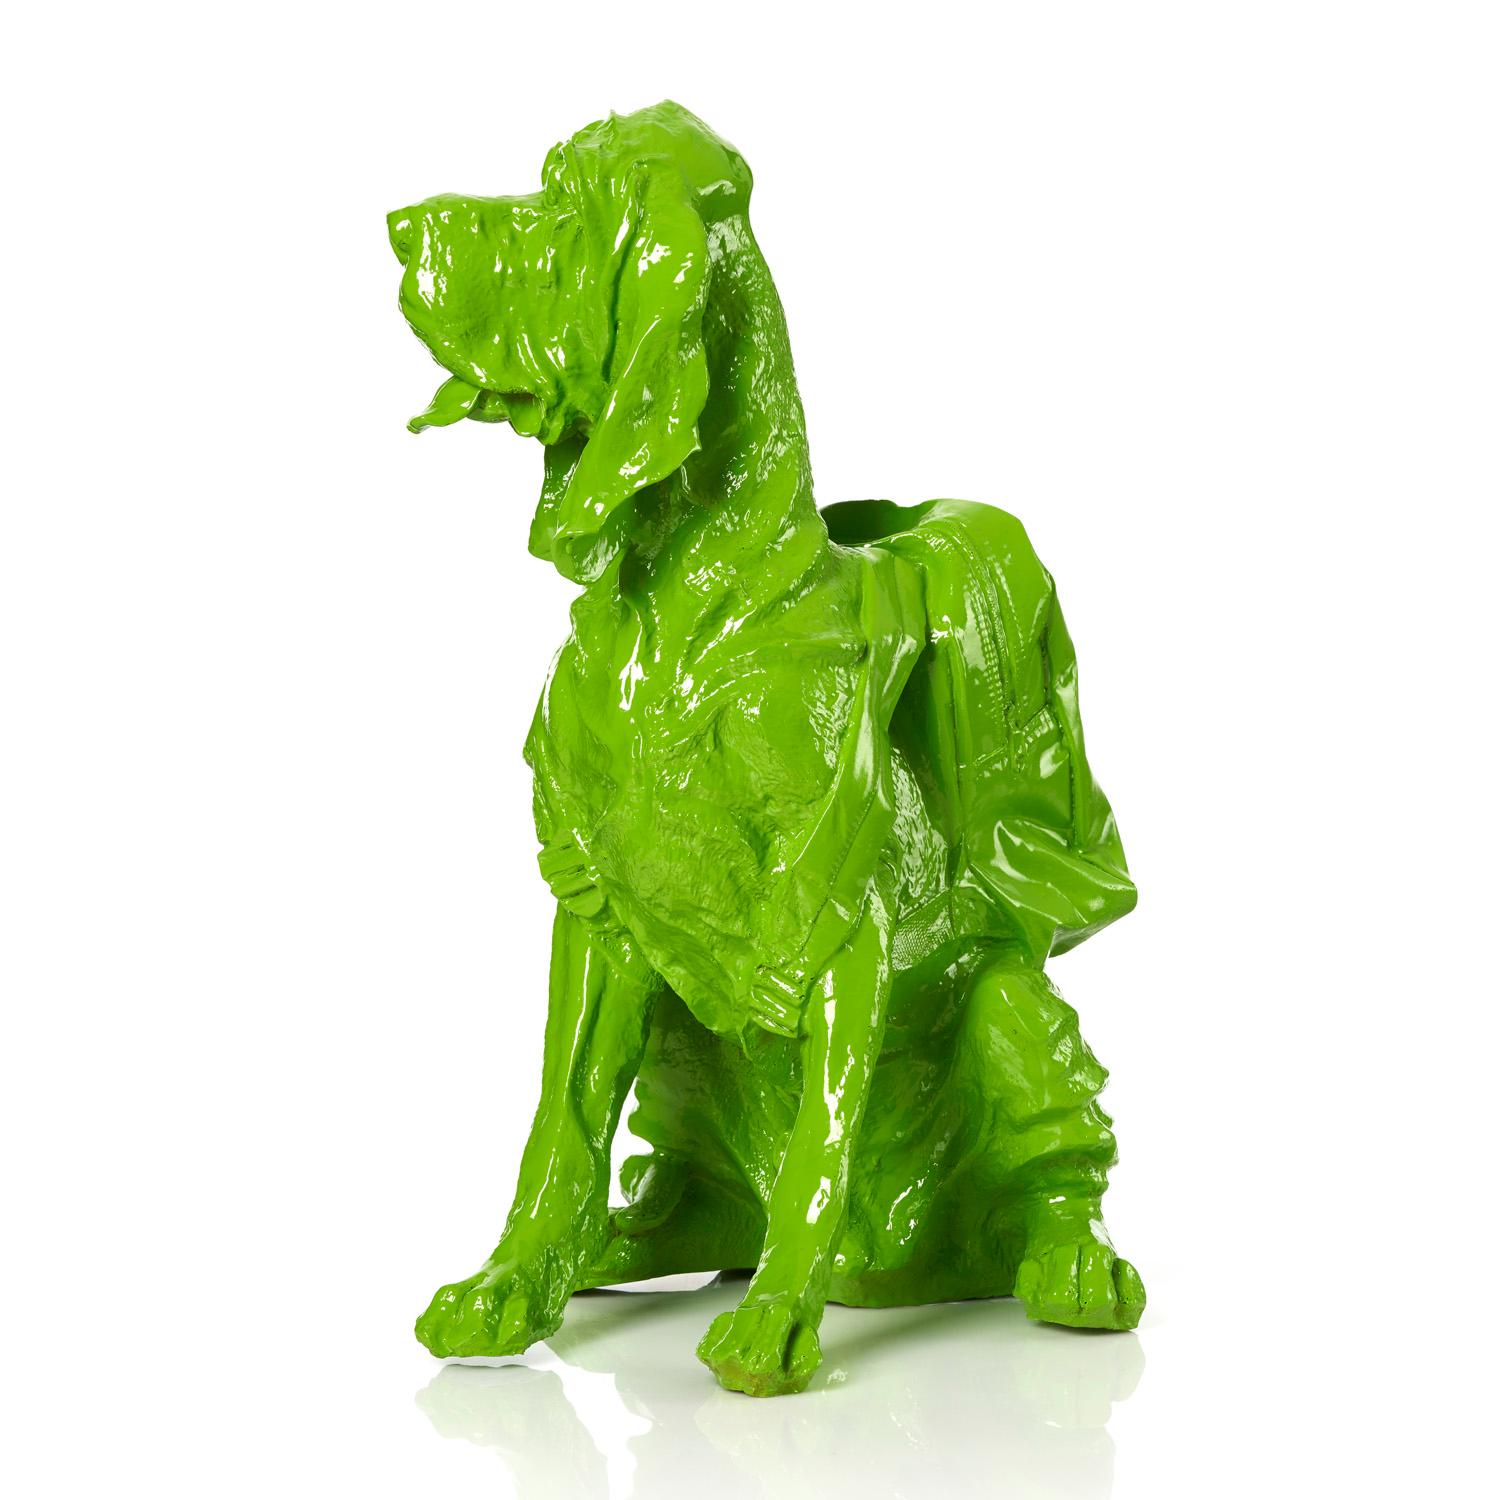 Cloned blue Bloodhound with Backpack (green) - Pop Art Sculpture by William Sweetlove